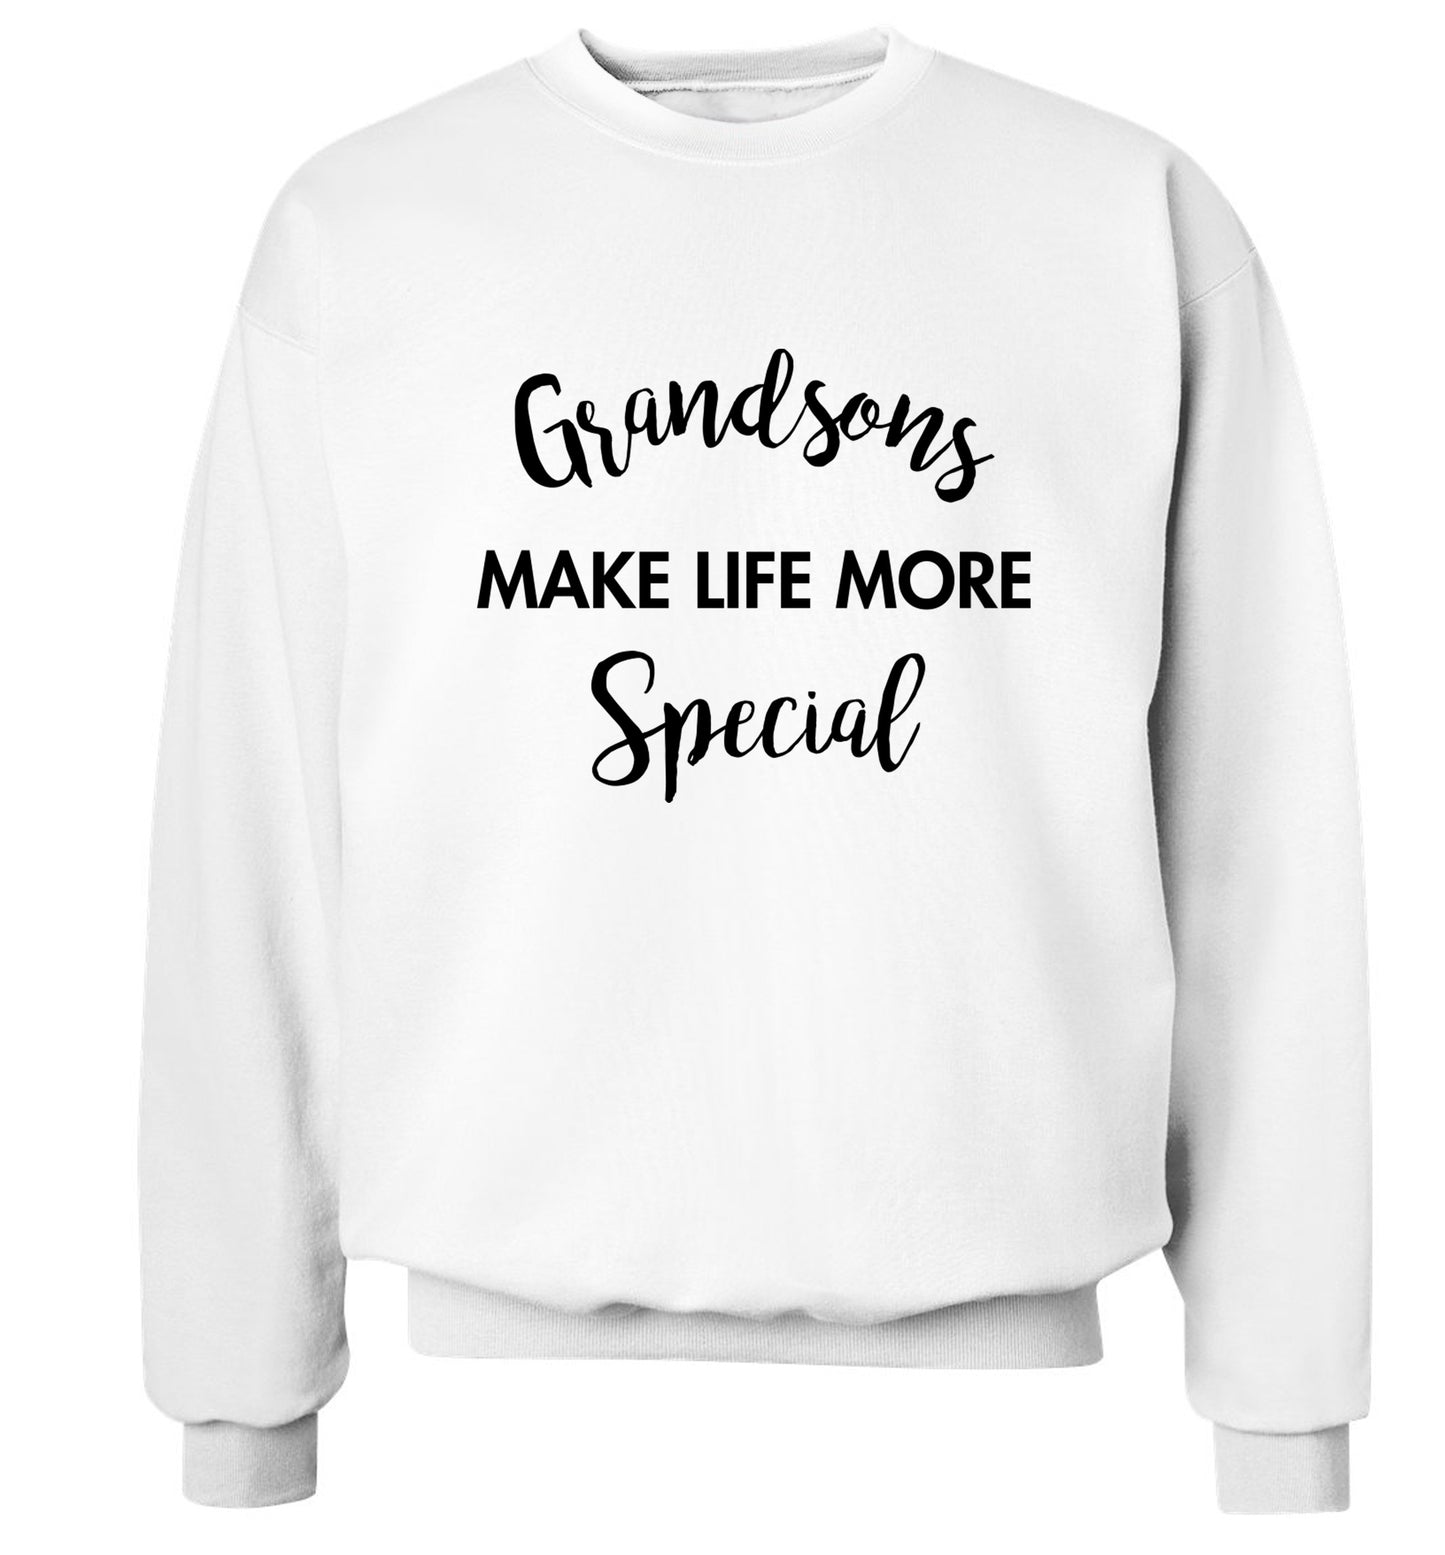 Grandsons make life more special Adult's unisex white Sweater 2XL